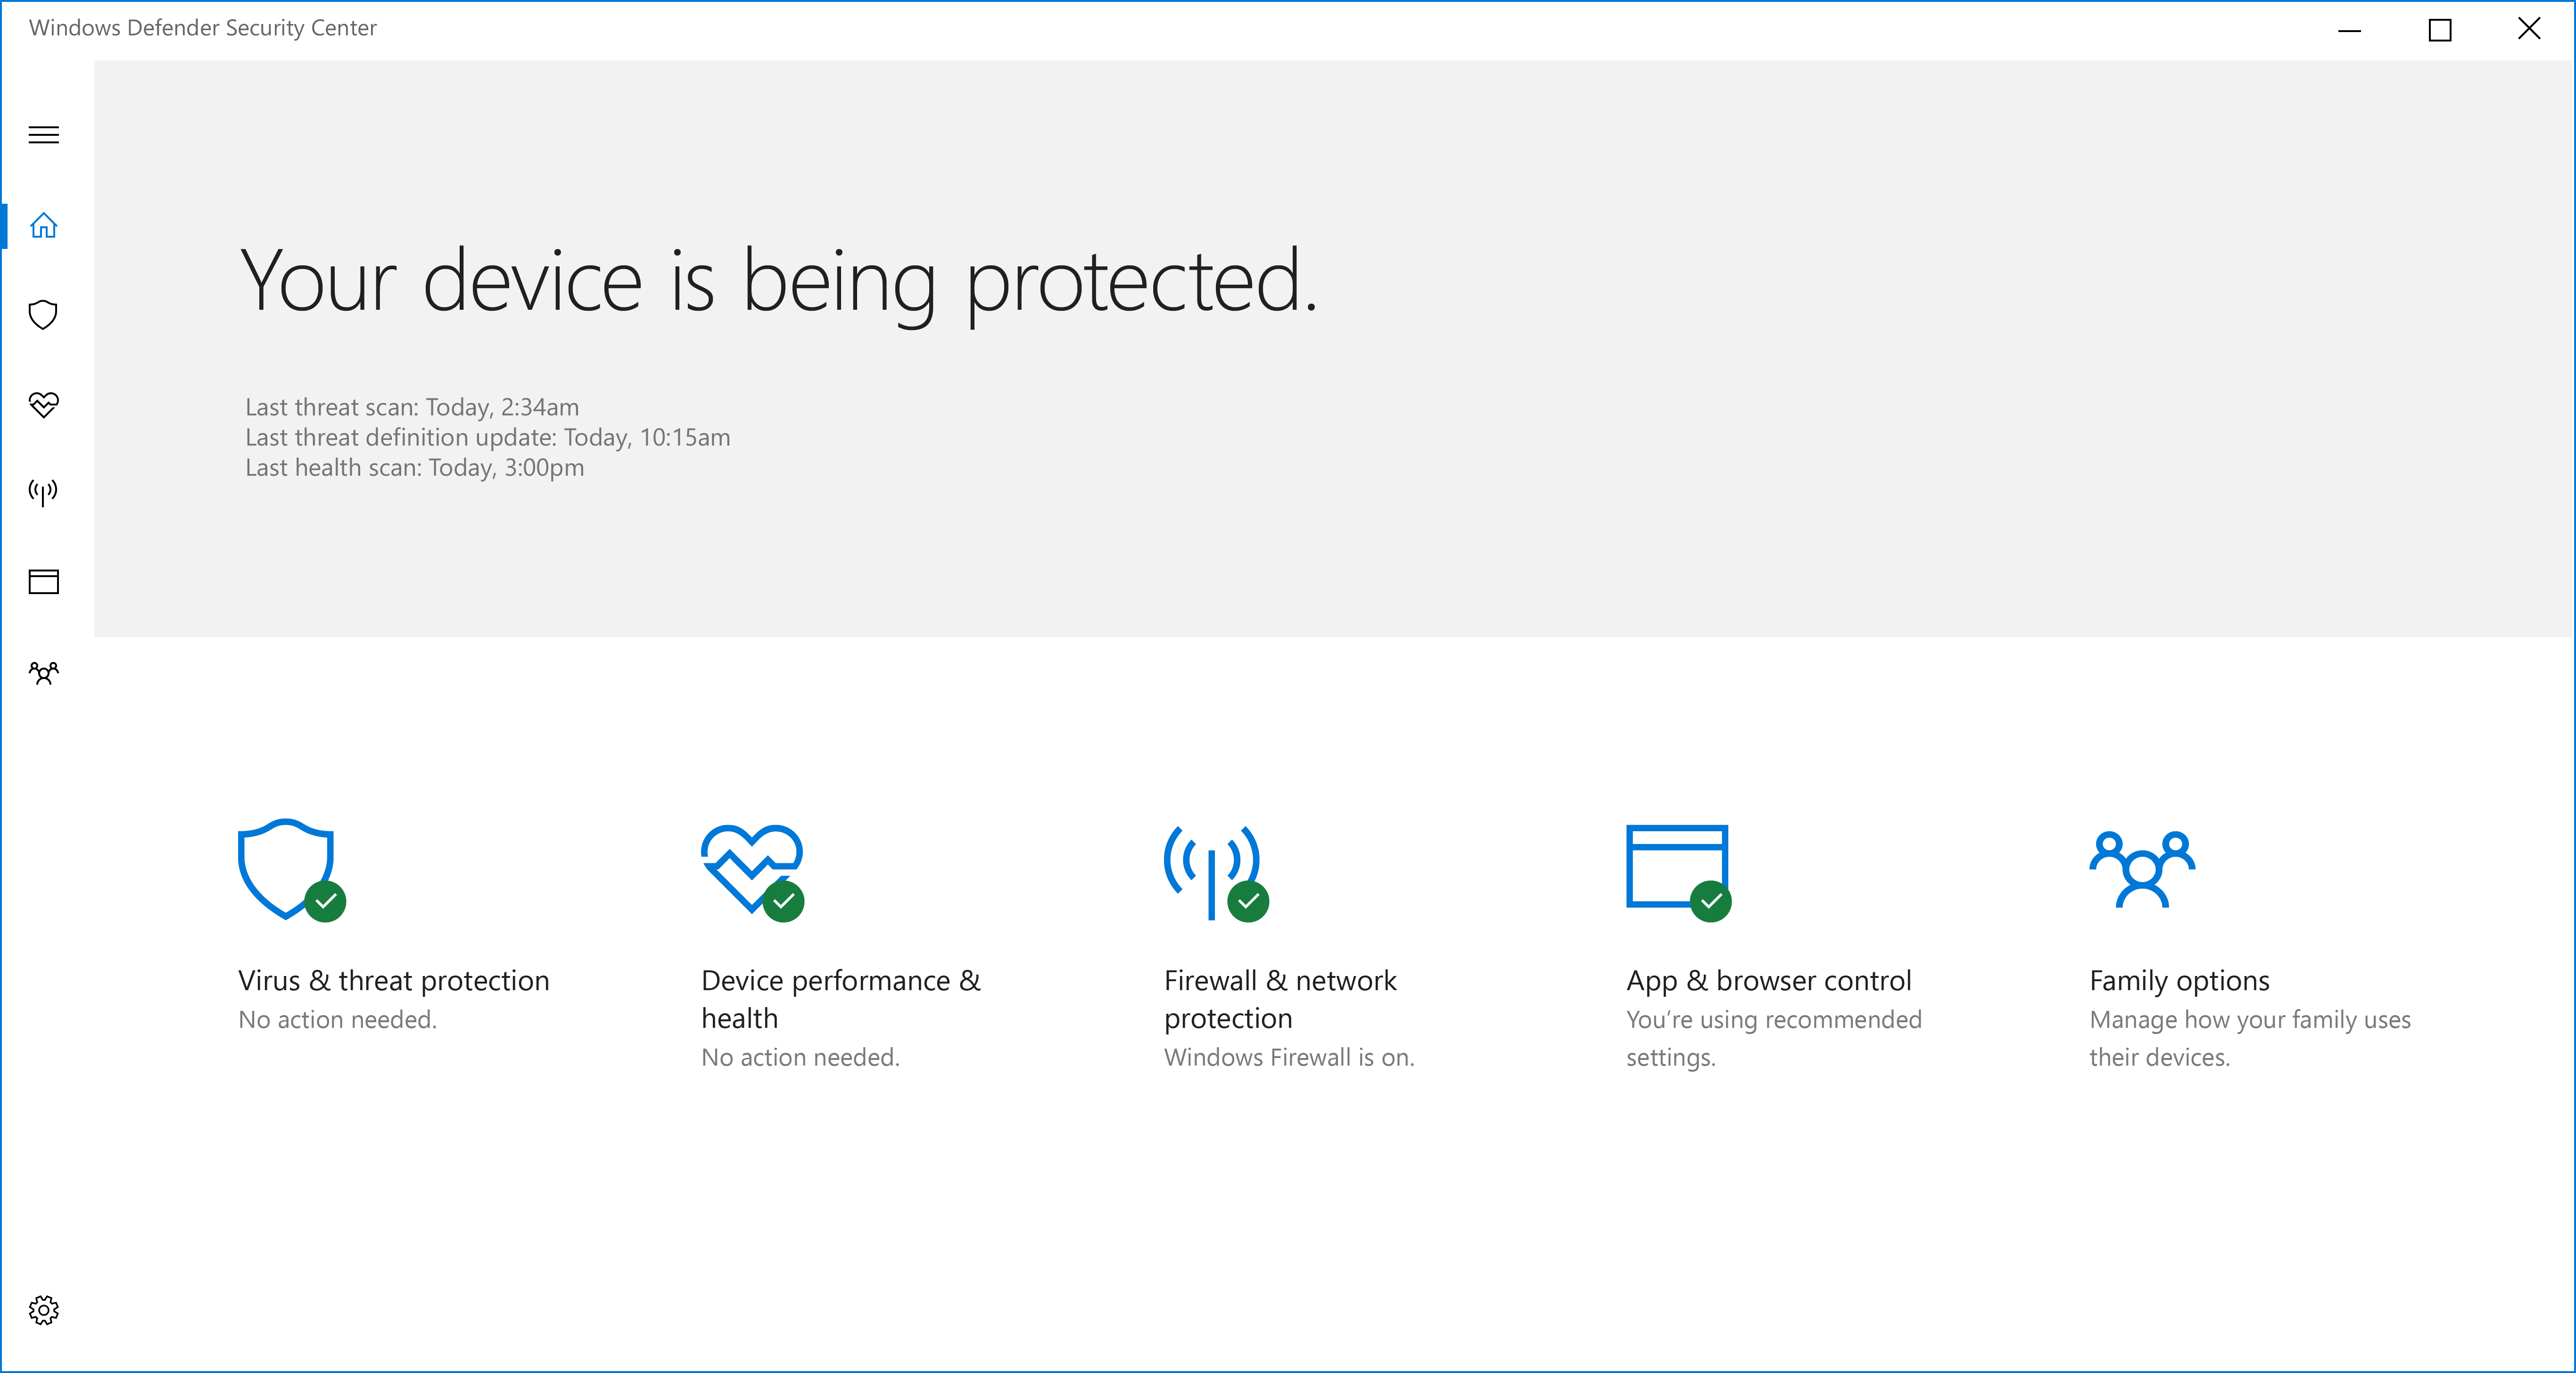 The new Windows Defender Security Center dashboard coming with the Windows 10 Creators Update gives you visibility of your device security, health and online safety.